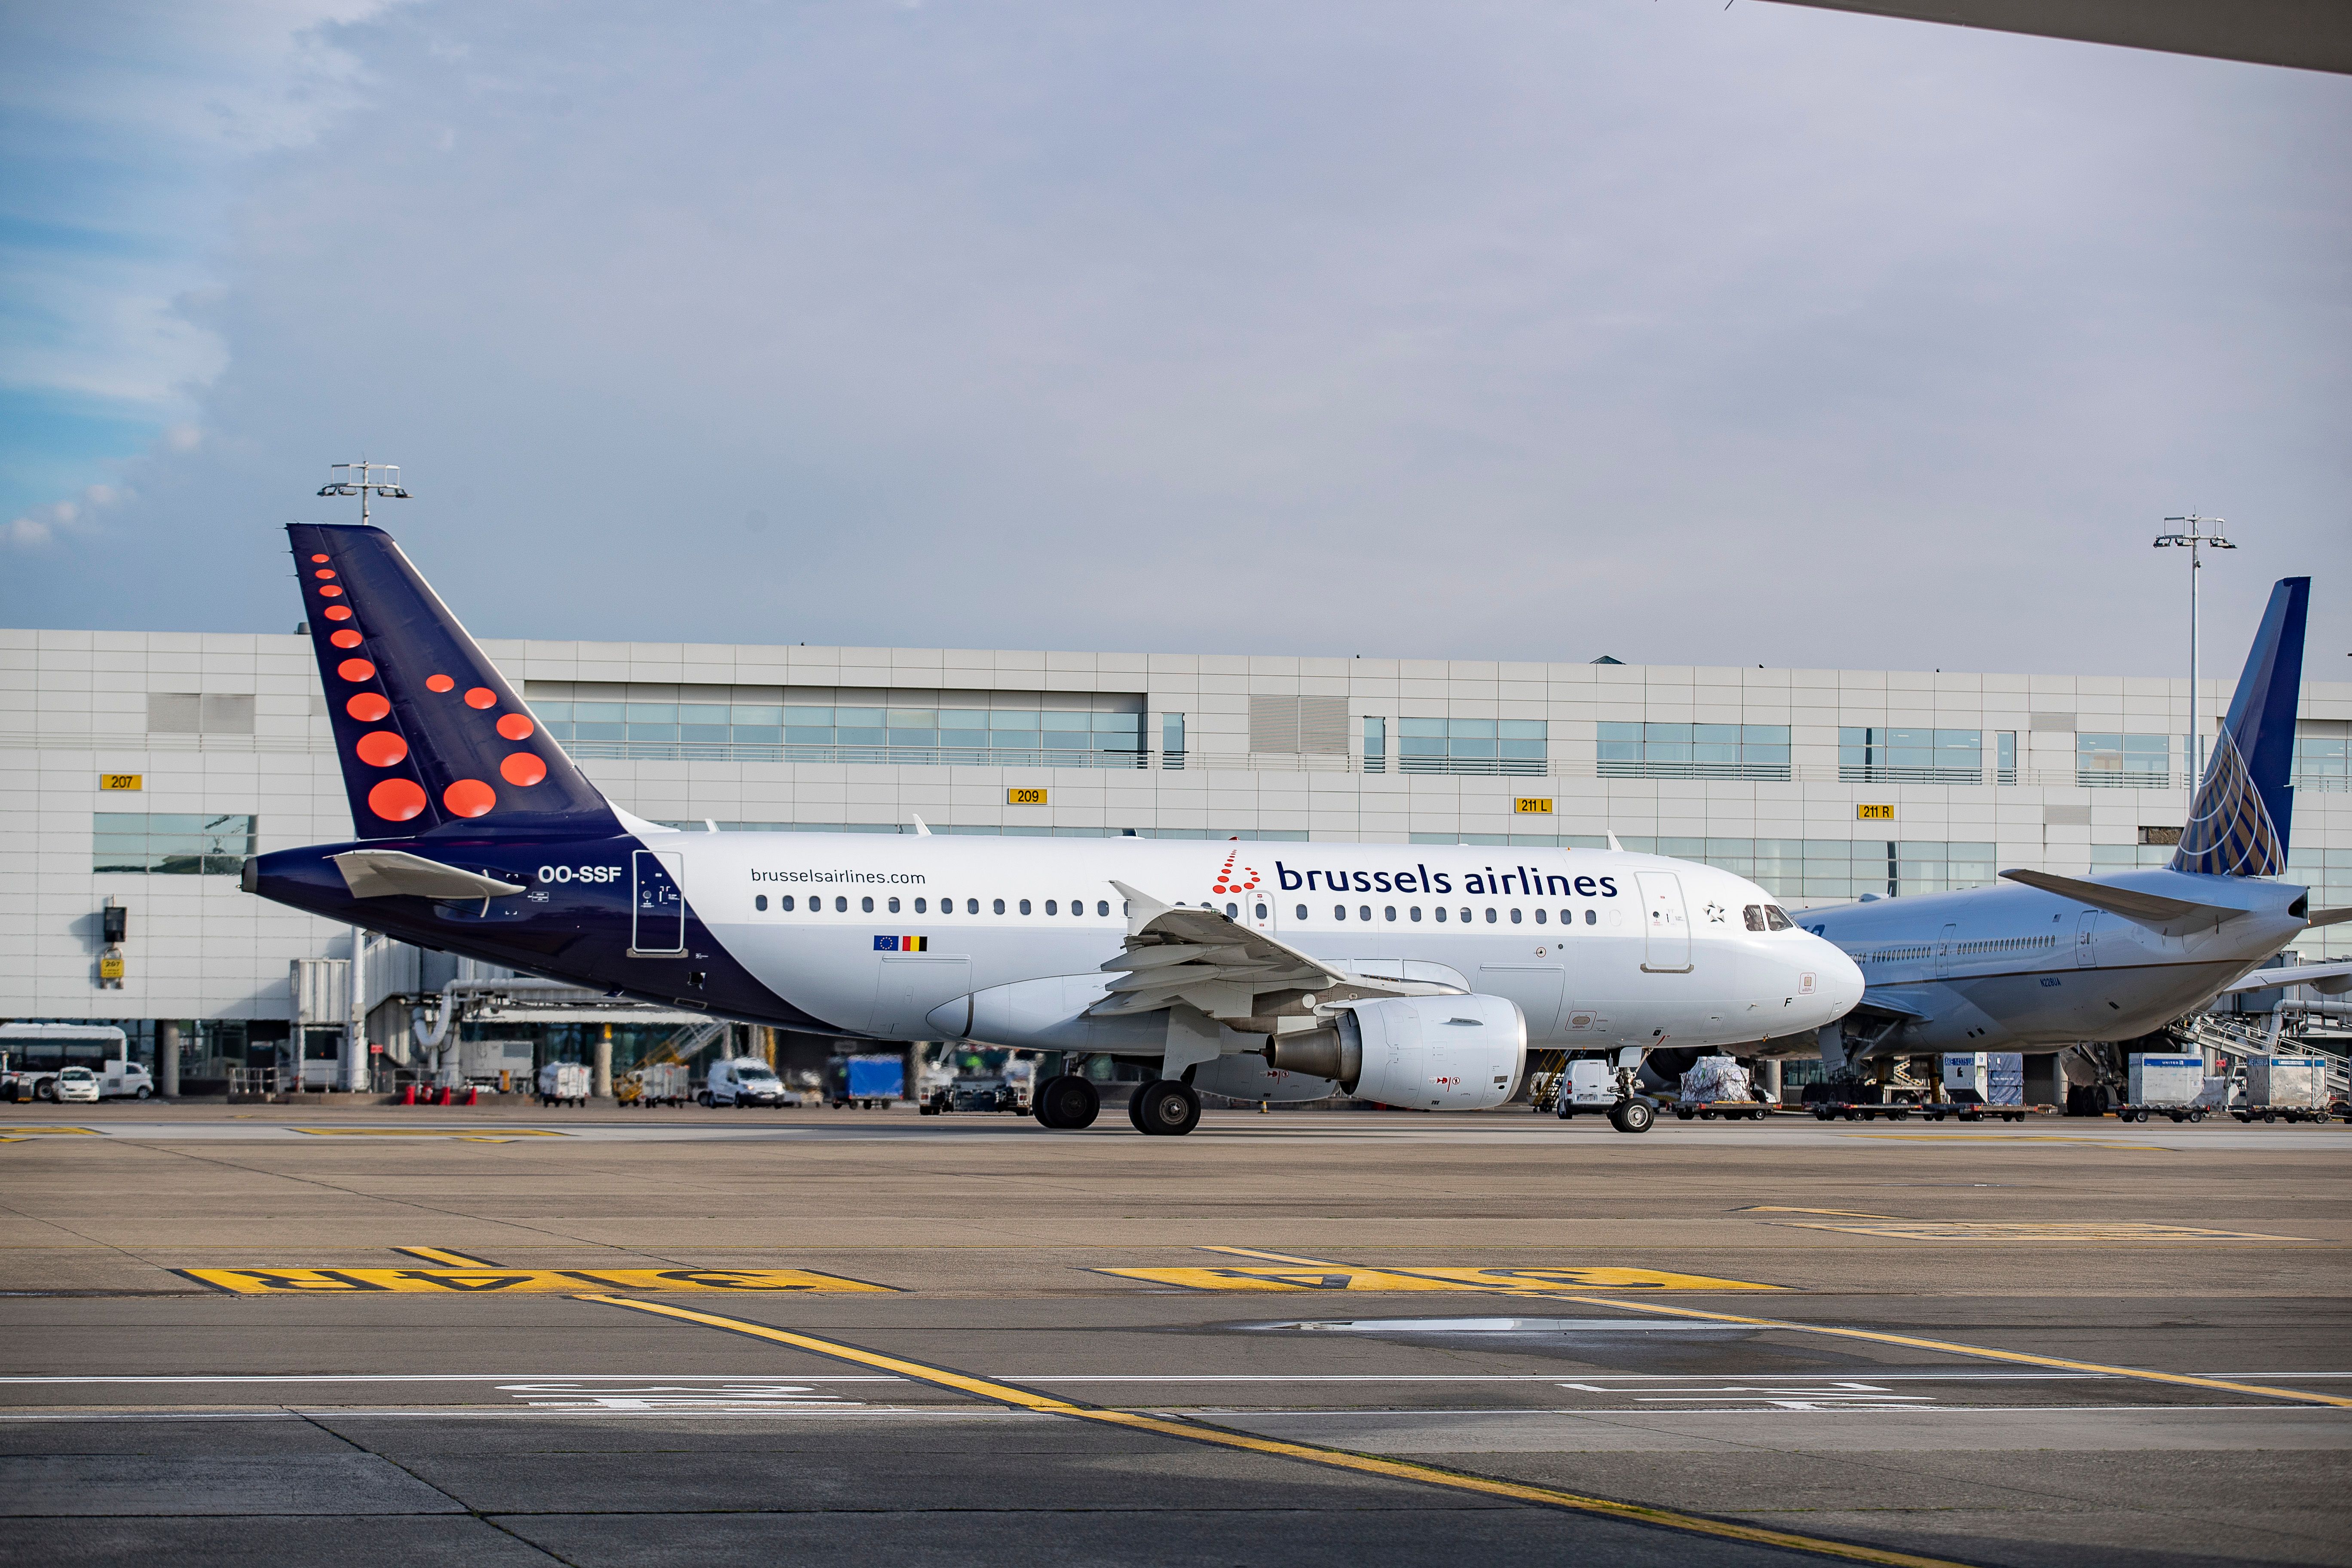 Brussels Airlines aircraft at Brussels Airport